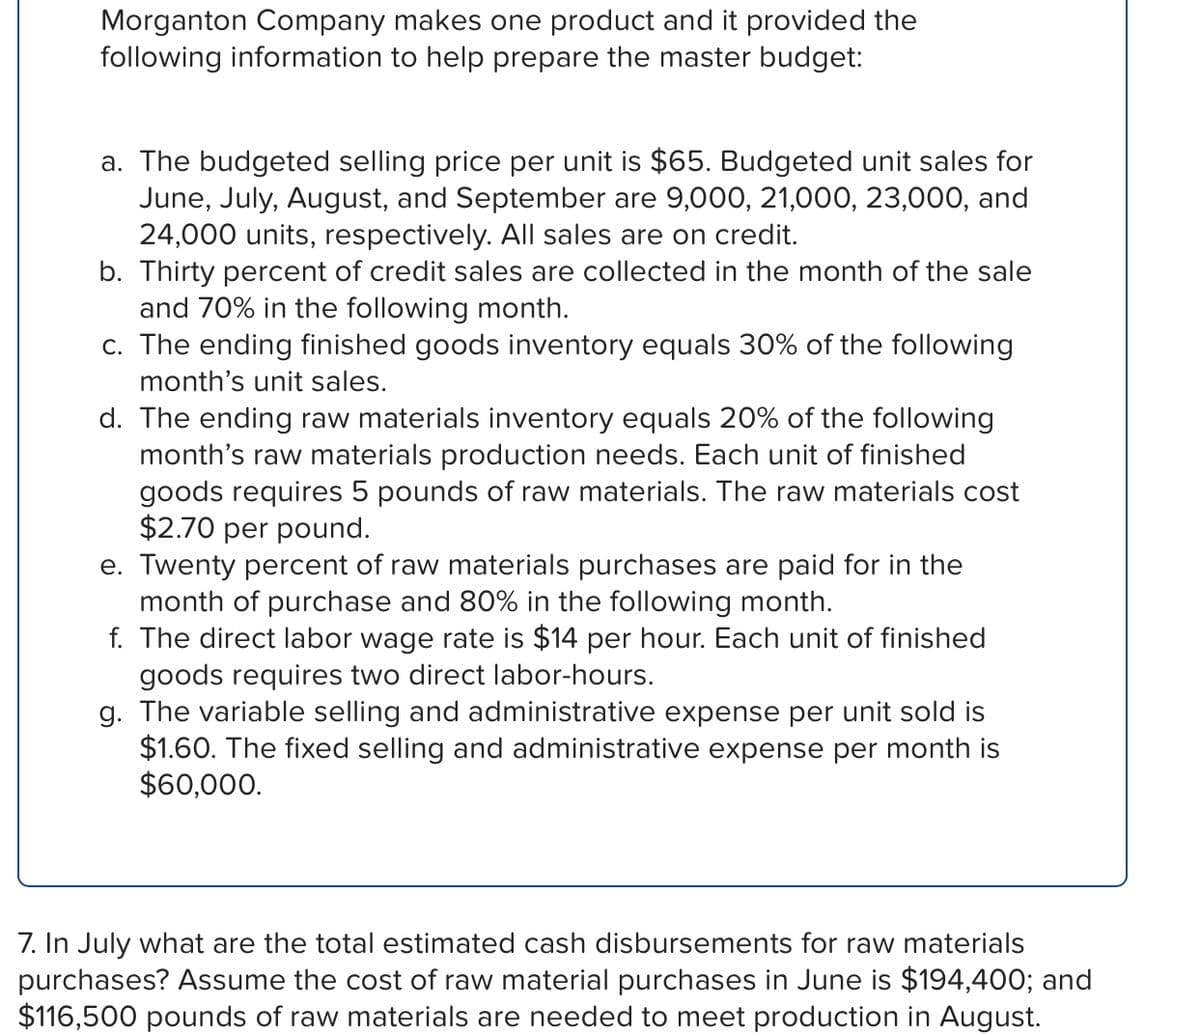 Morganton Company makes one product and it provided the
following information to help prepare the master budget:
a. The budgeted selling price per unit is $65. Budgeted unit sales for
June, July, August, and September are 9,000, 21,000, 23,000, and
24,000 units, respectively. All sales are on credit.
b. Thirty percent of credit sales are collected in the month of the sale
and 70% in the following month.
c. The ending finished goods inventory equals 30% of the following
month's unit sales.
d. The ending raw materials inventory equals 20% of the following
month's raw materials production needs. Each unit of finished
goods requires 5 pounds of raw materials. The raw materials cost
$2.70 per pound.
e. Twenty percent of raw materials purchases are paid for in the
month of purchase and 80% in the following month.
f. The direct labor wage rate is $14 per hour. Each unit of finished
goods requires two direct labor-hours.
g. The variable selling and administrative expense per unit sold is
$1.60. The fixed selling and administrative expense per month is
$60,000.
7. In July what are the total estimated cash disbursements for raw materials
purchases? Assume the cost of raw material purchases in June is $194,400; and
$116,500 pounds of raw materials are needed to meet production in August.